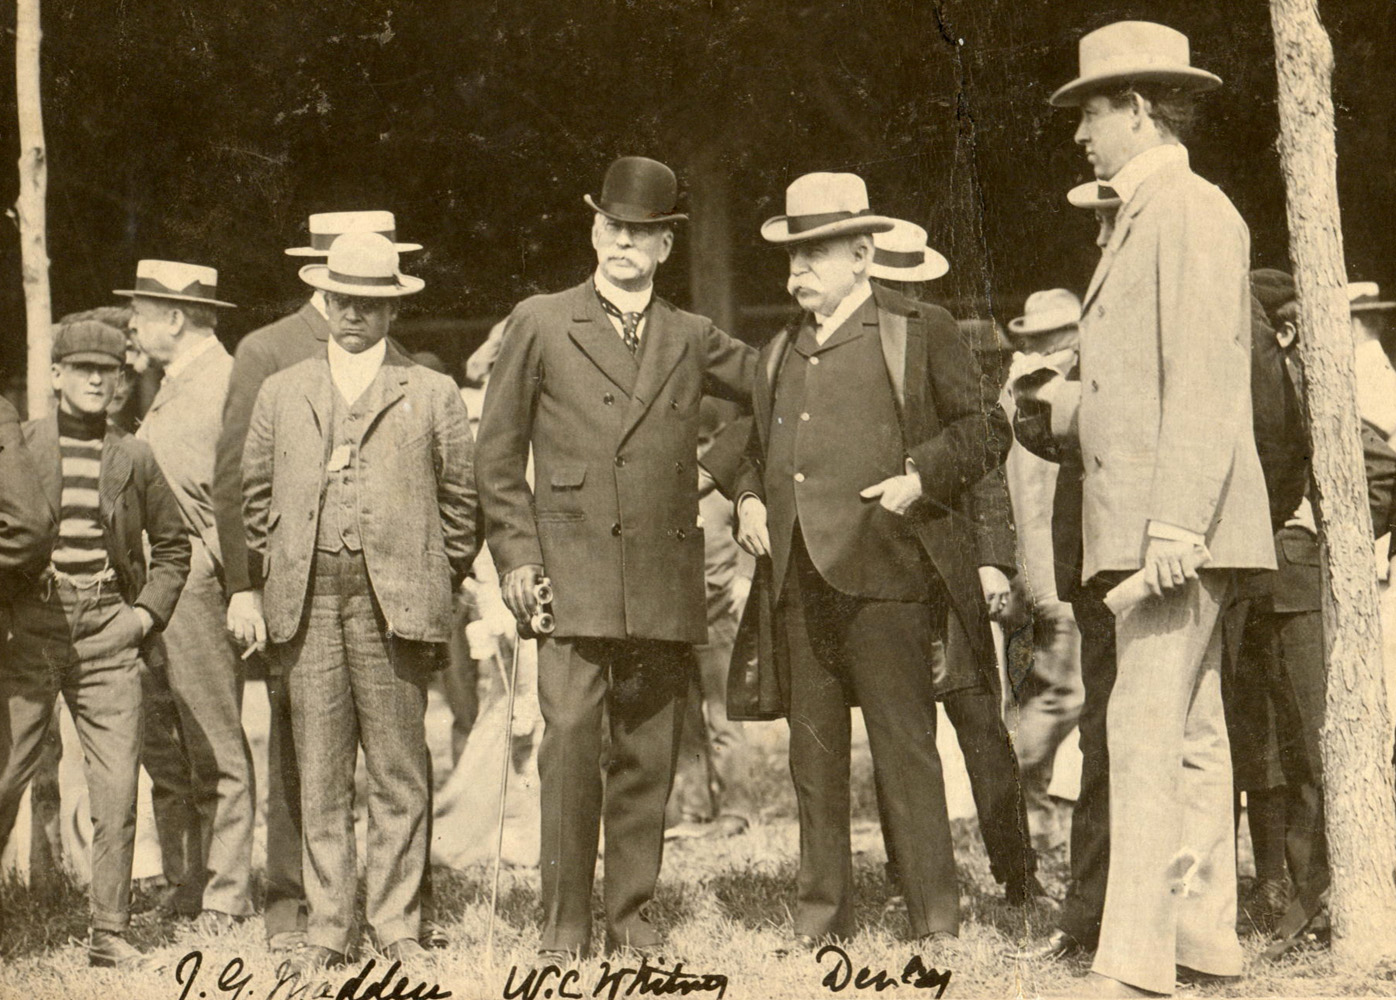 John Madden, W. C. Whitney, and Lord Derby at the Saratoga races in 1904 (Museum Collection)